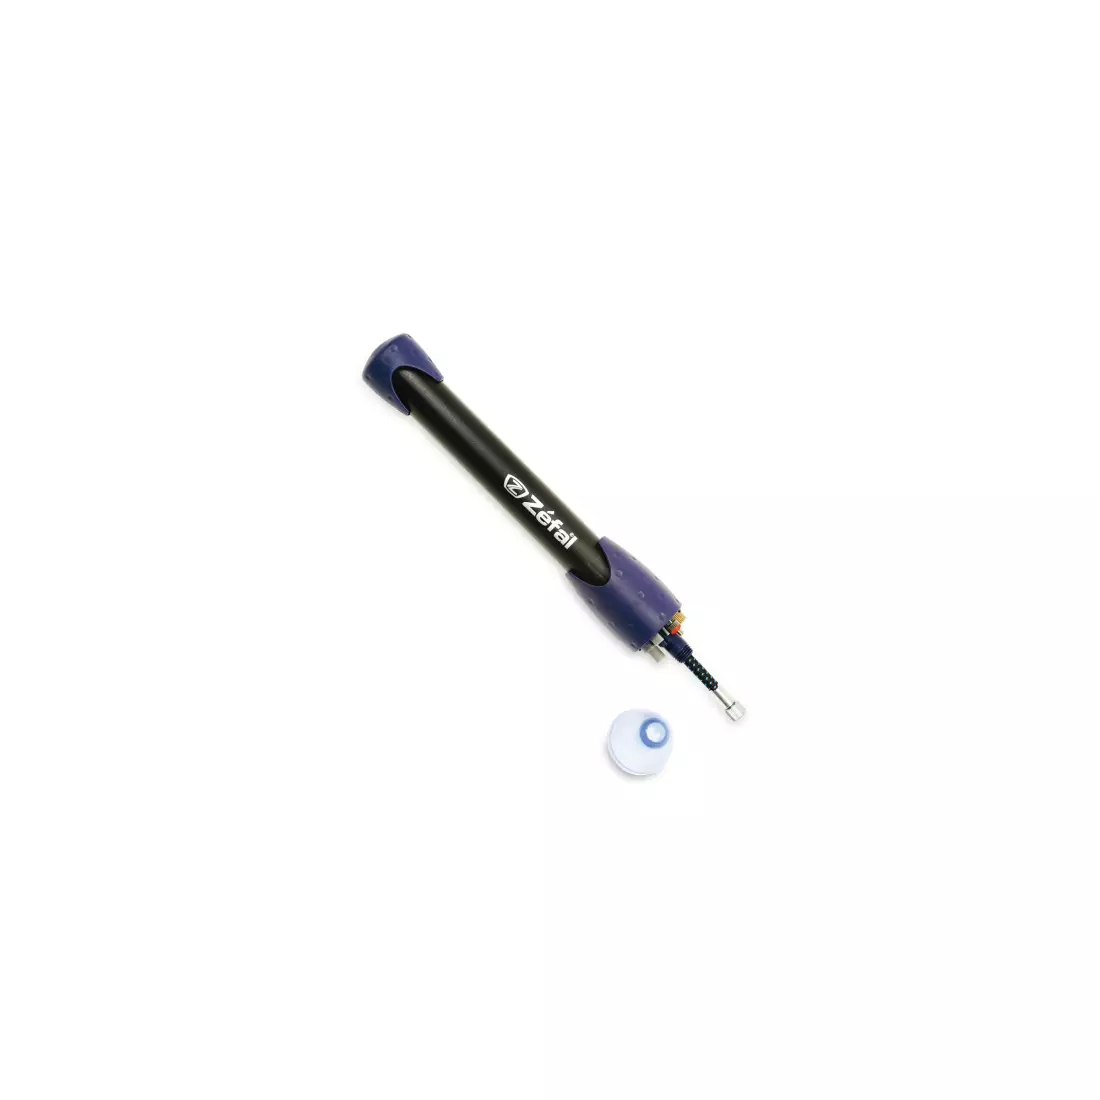 ZEFAL hand bicycle pump max black-blue ZF-3180